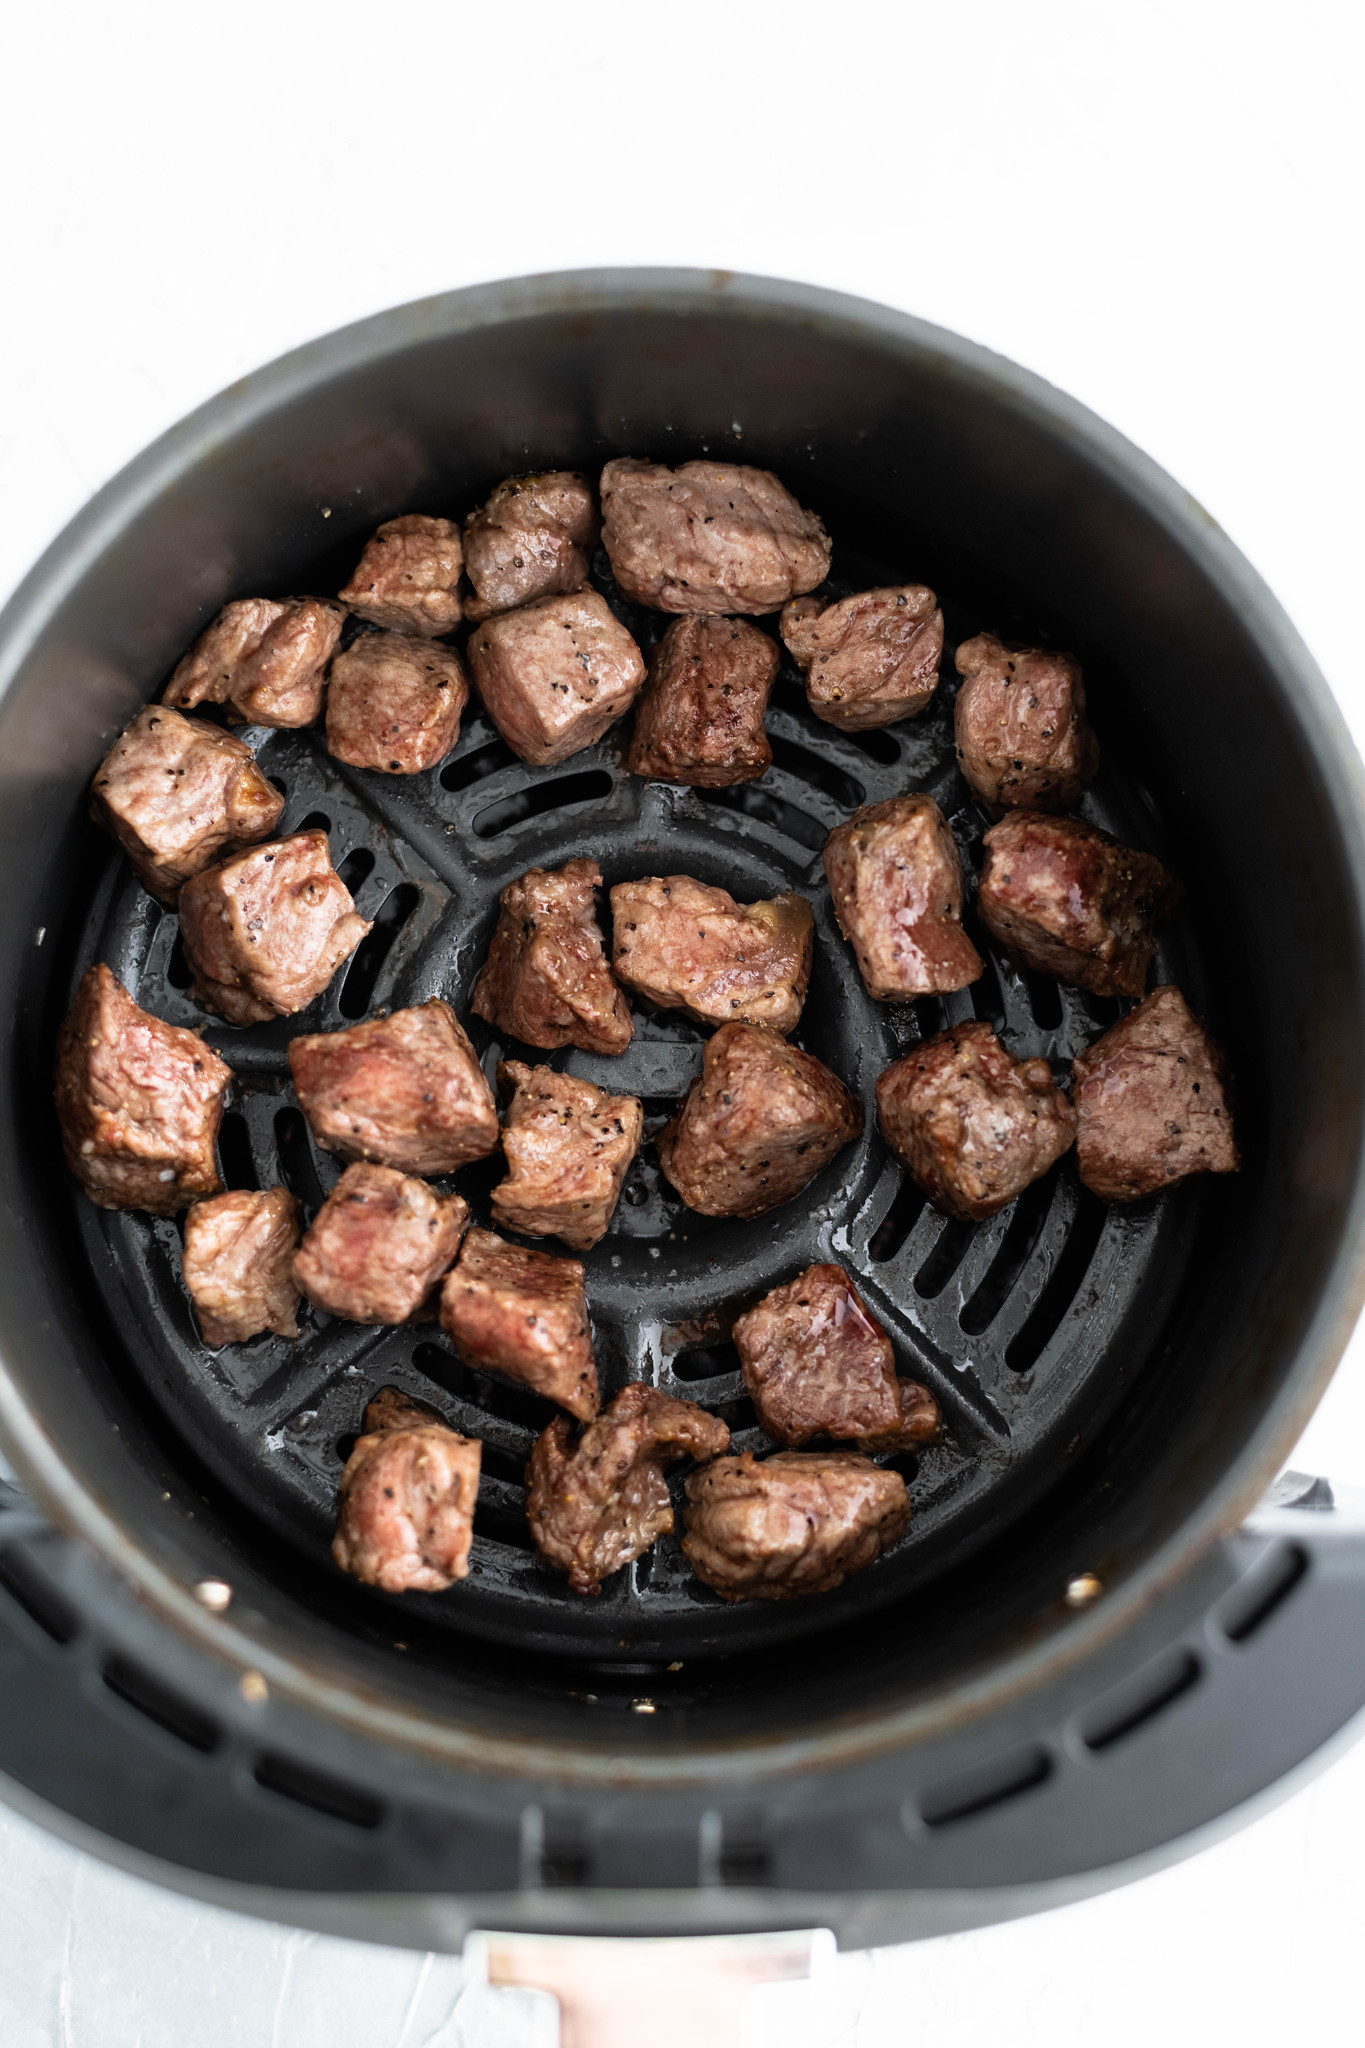 Whether you need a quick appetizer or dinner, these Air Fryer Steak Bites will save the day. Done in minutes and super tender.